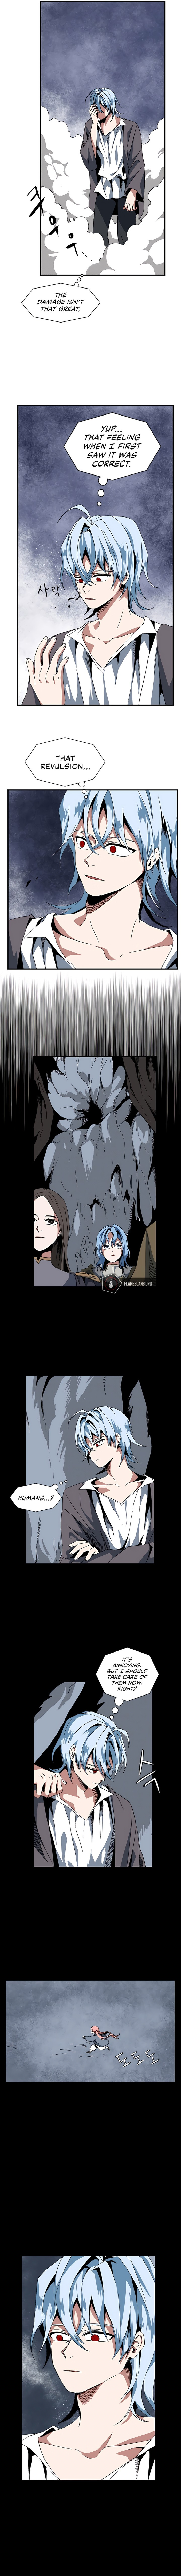 One Step For The Dark Lord Chapter 2 Page 13